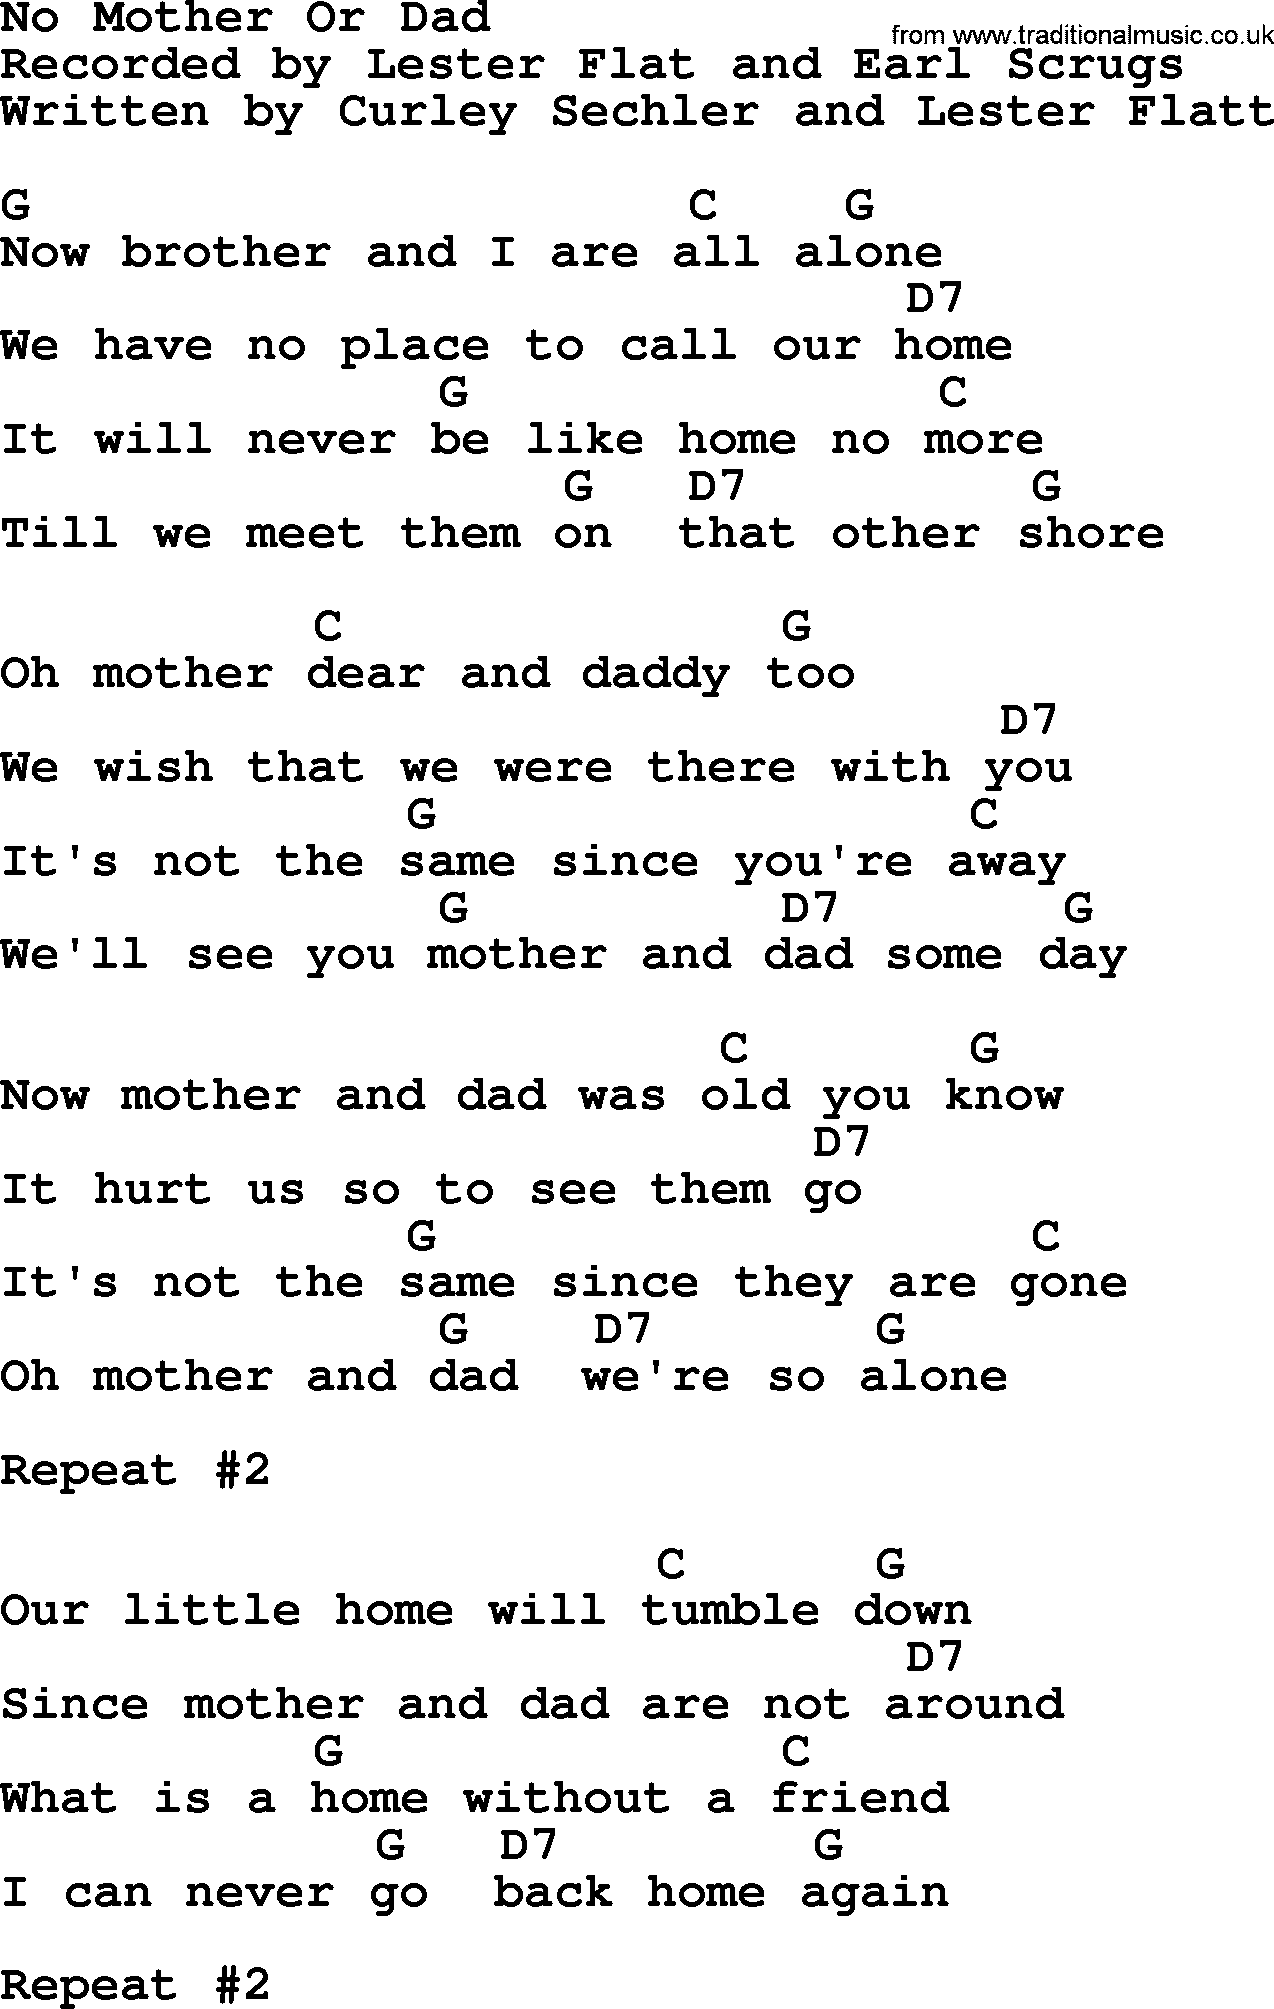 Bluegrass song: No Mother Or Dad, lyrics and chords